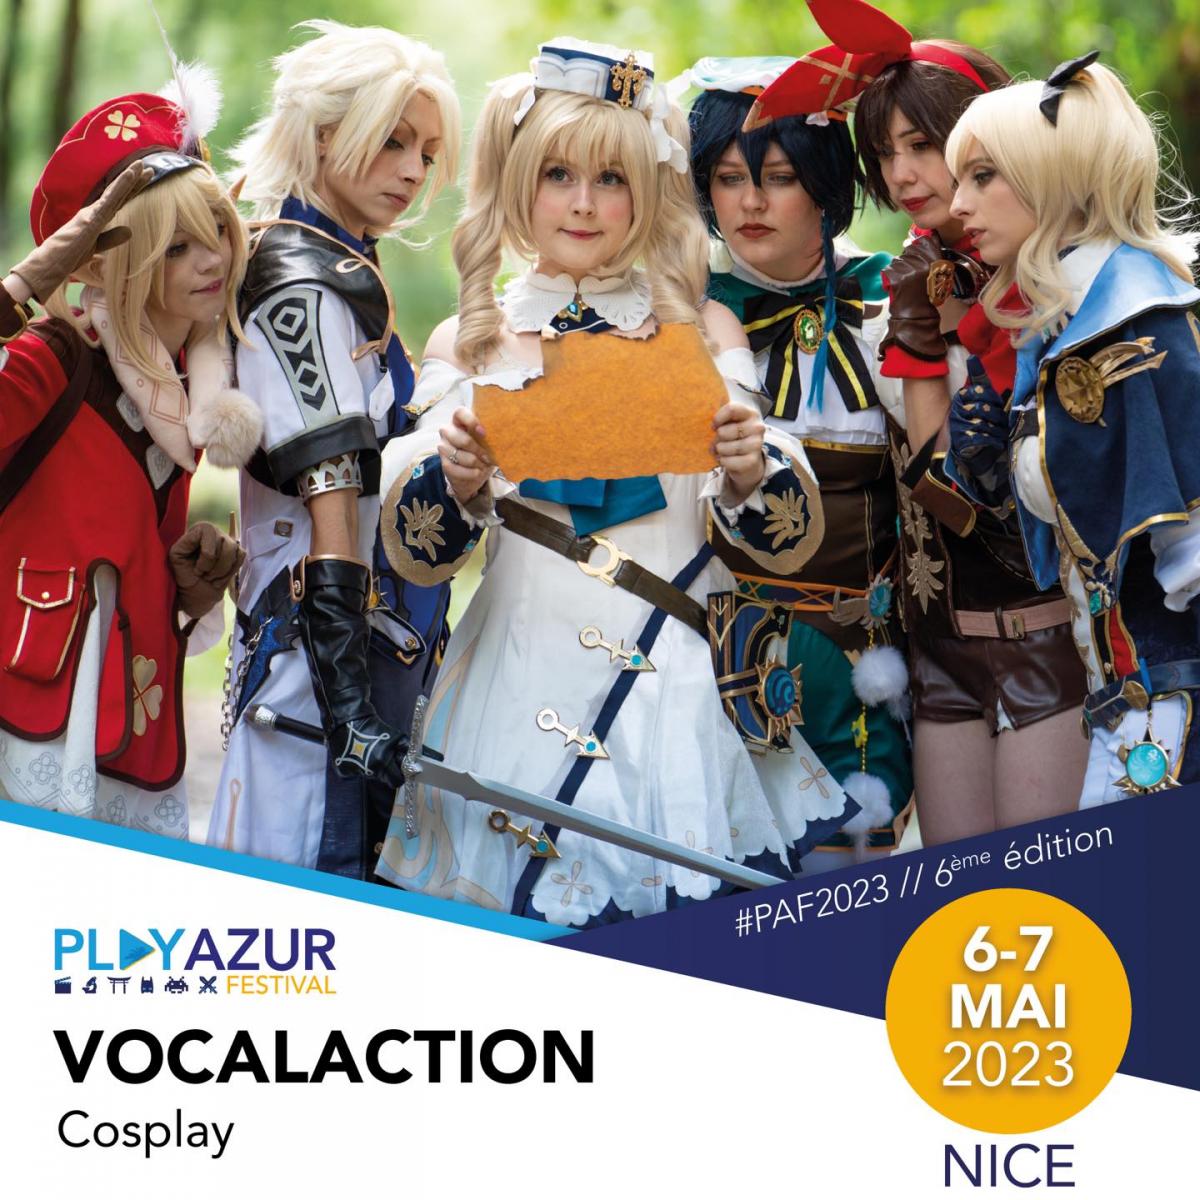 concours-cosplay-sud-france-nice-play-azur-festival-2023